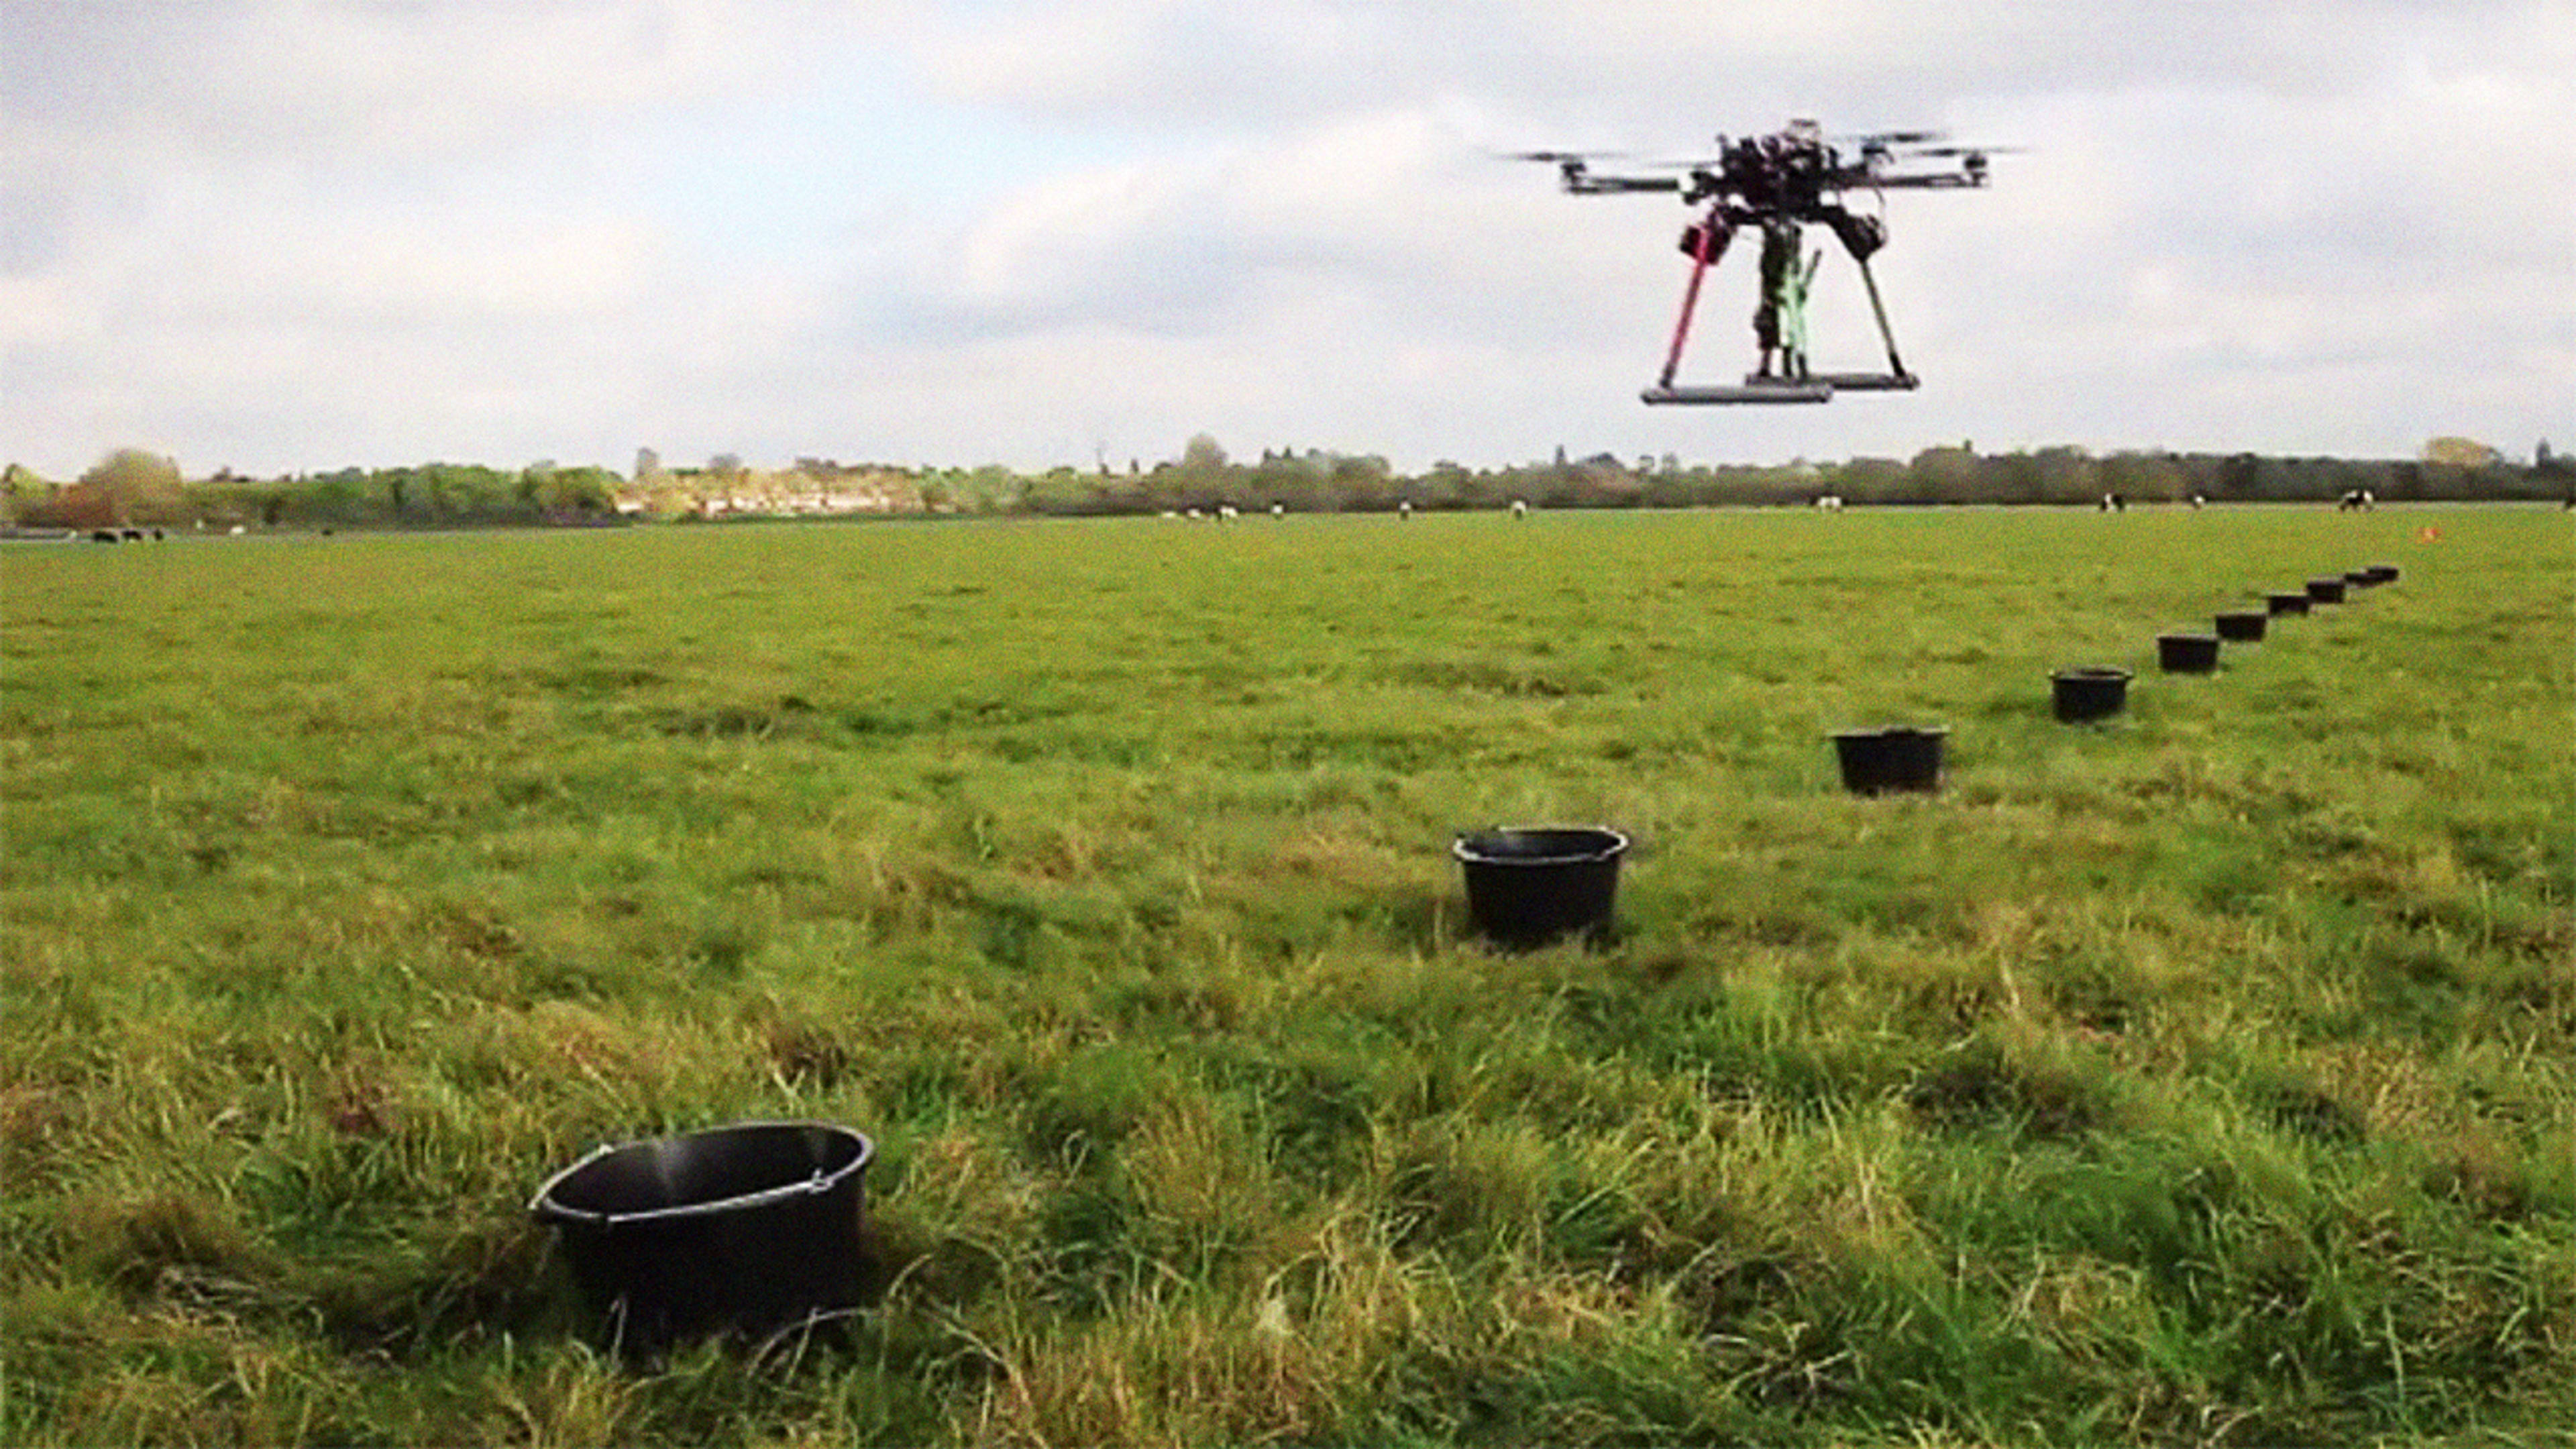 These Tree-Planting Drones Are About To Start An Entire Forest From The Sky